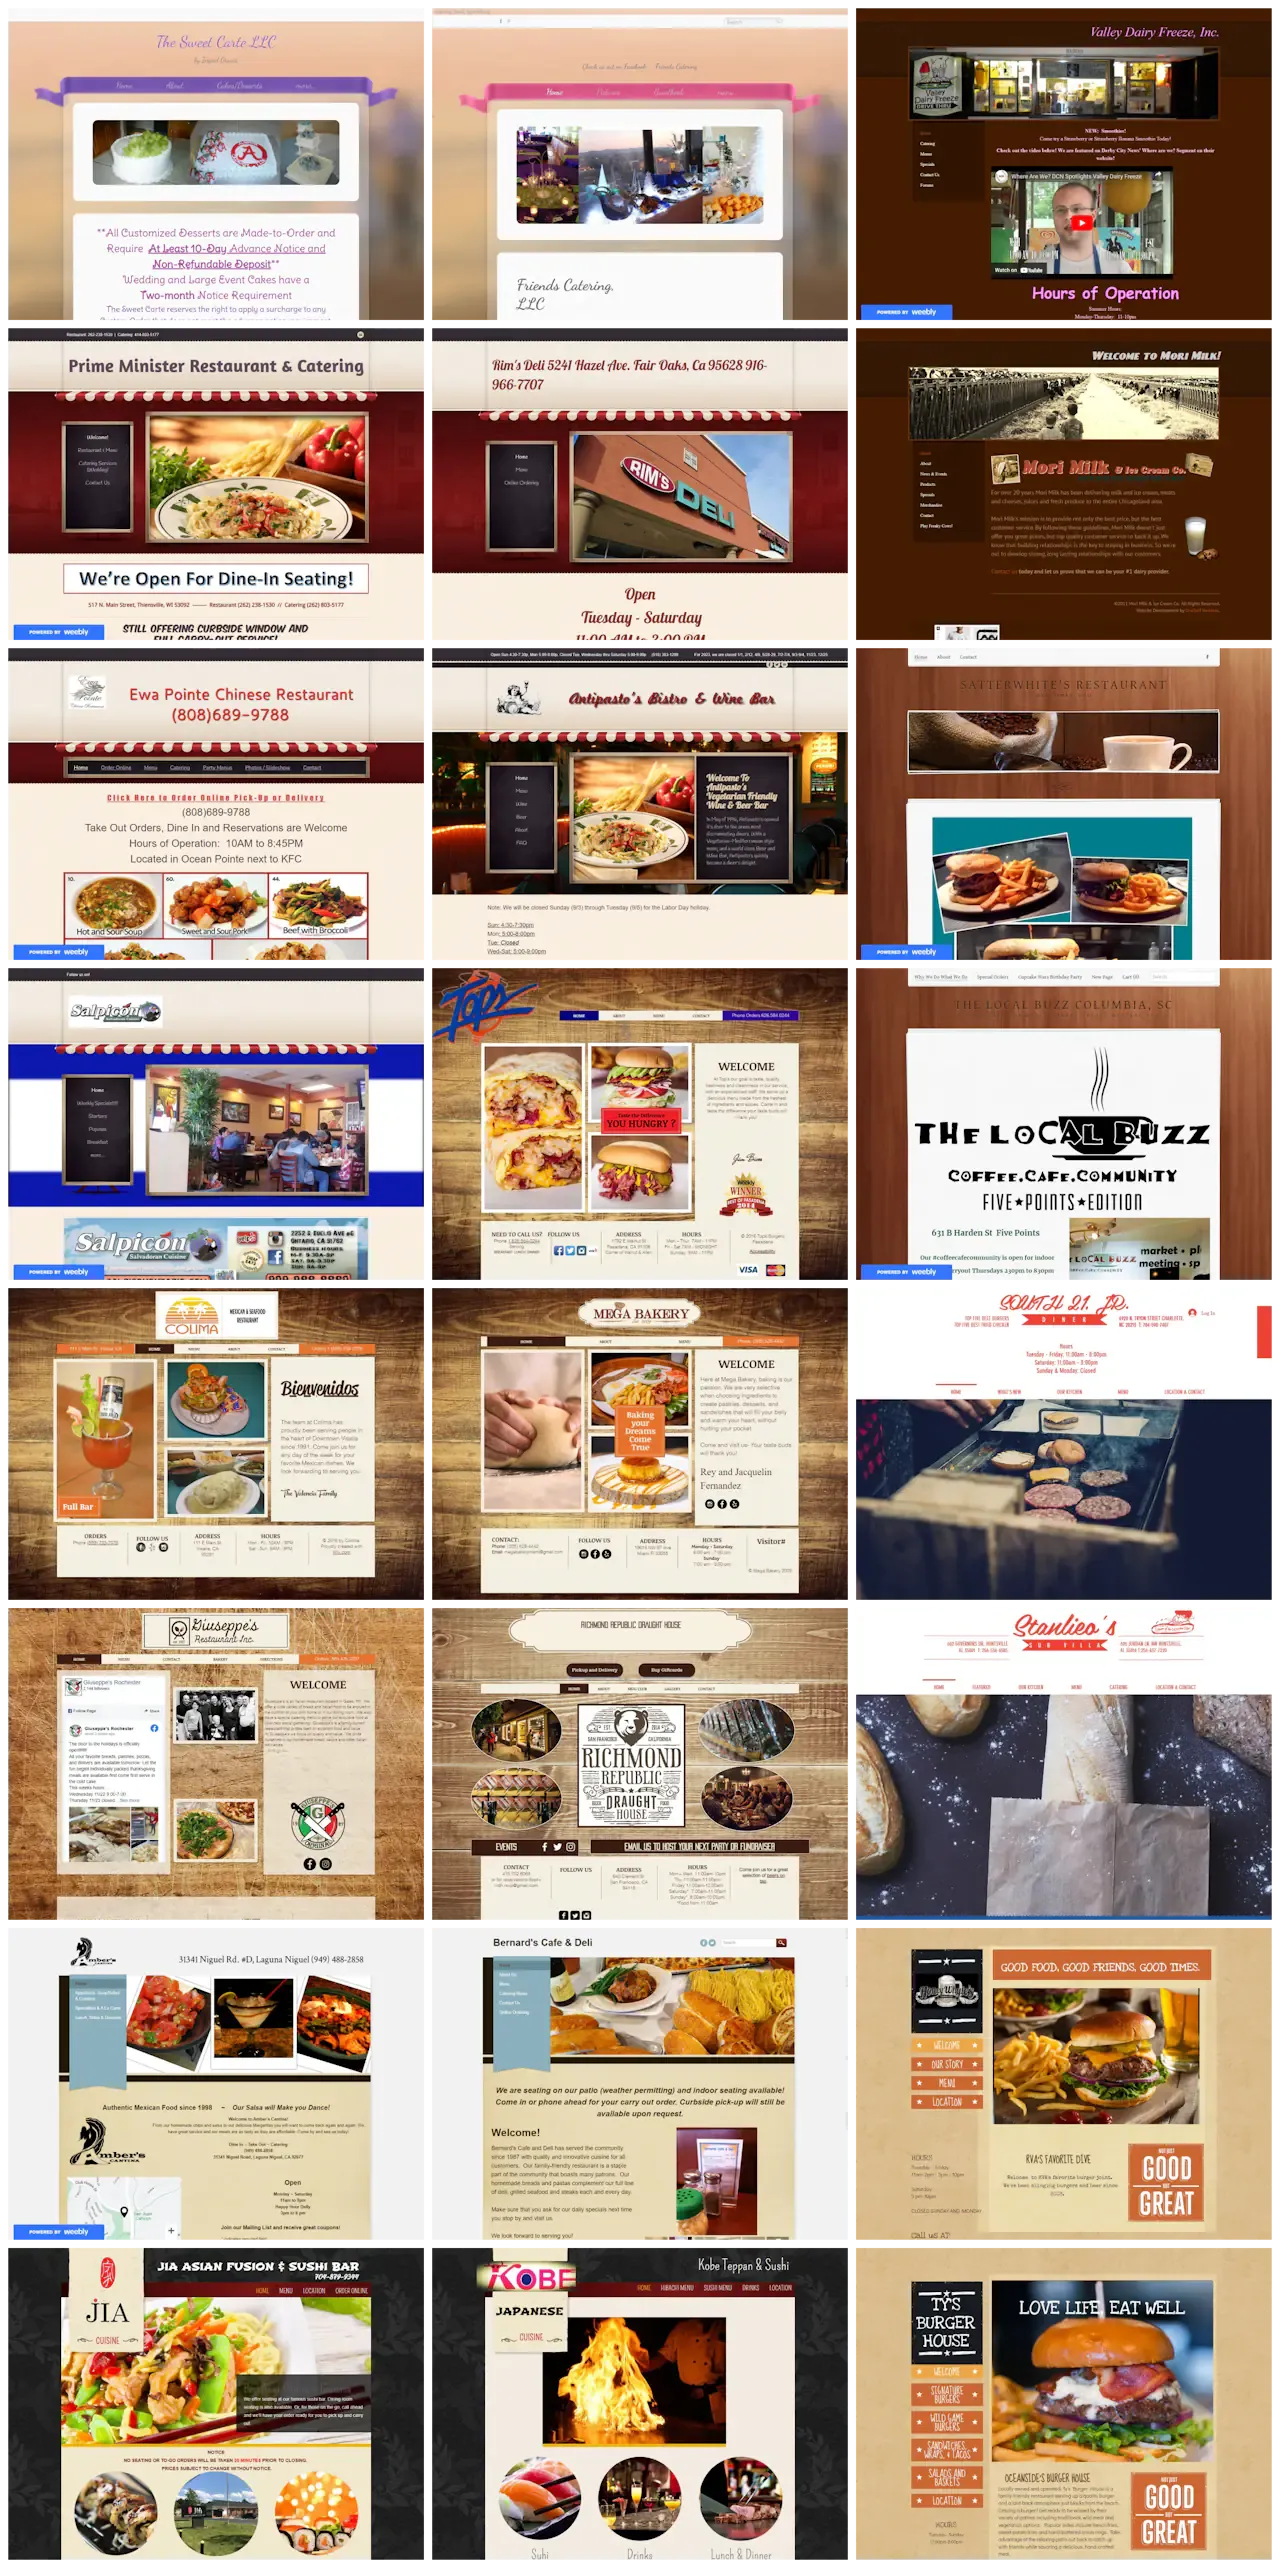 Collage of screenshots of restaurant websites created using DIY website builder services. Many of them have the same templates and look very similar.